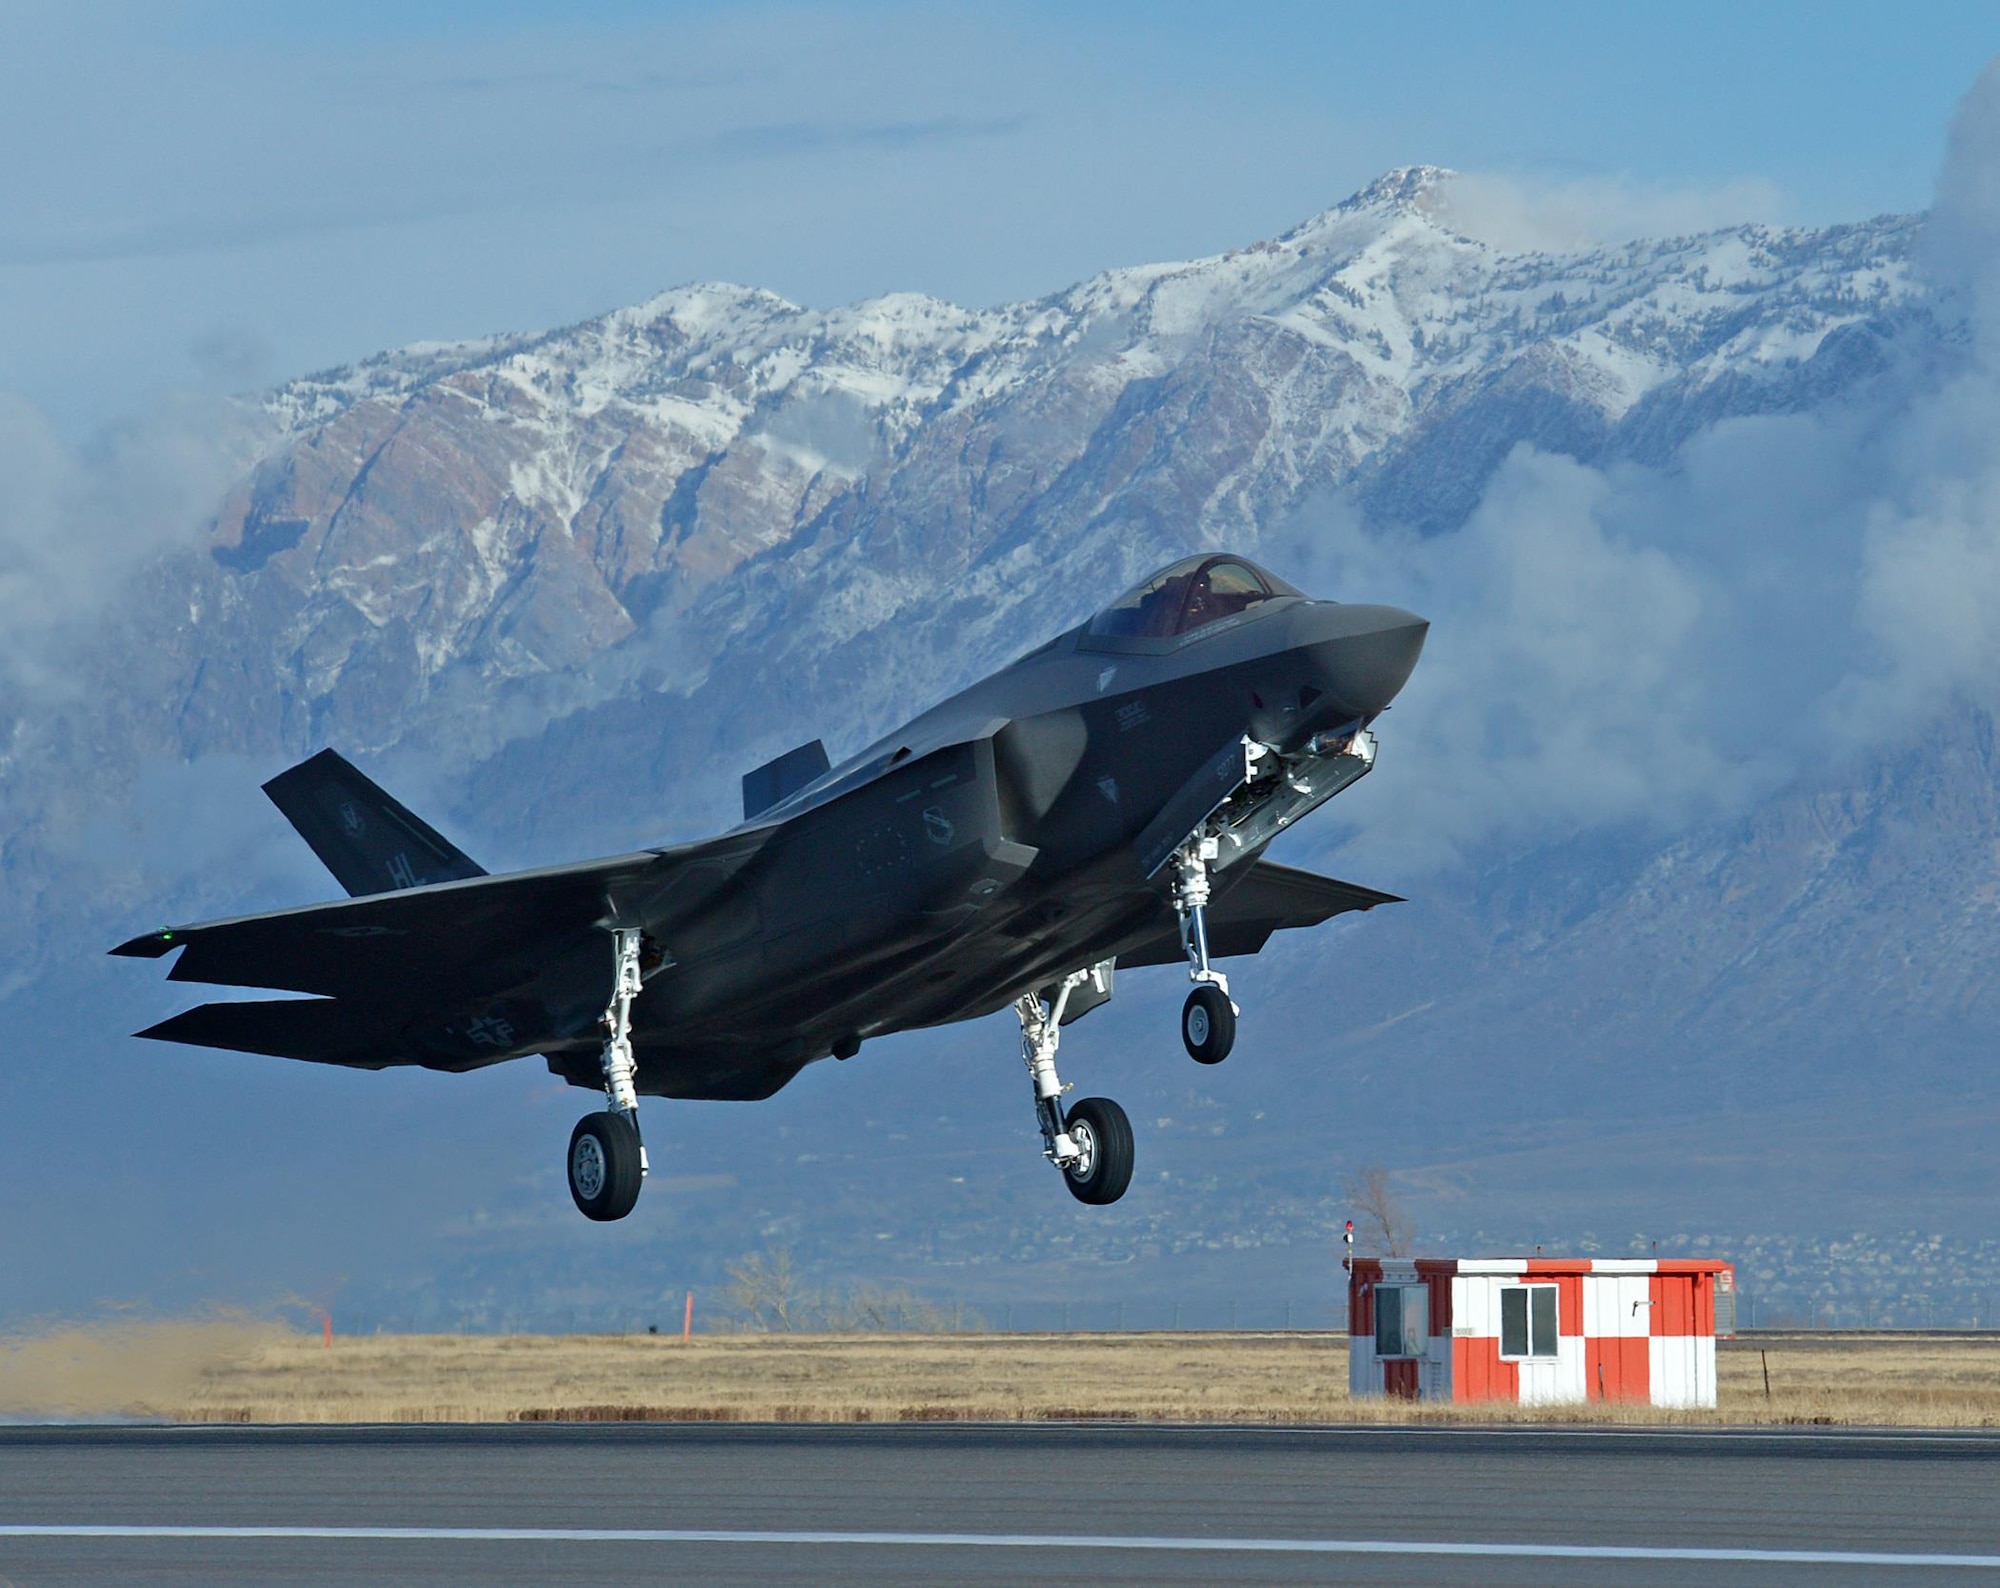 Maj. Jayson Rickard, a reservist in the 466th Fighter Squadron, takes off for his first local sortie in the F-35 Lightning II at Hill Air Force Base today. Rickard's flight marks the 100th sortie in the F-35 at Hill since the first combat-coded aircraft arrived in September. In the
three months since the first F-35s arrived at Hill, only two of 129 scheduled sorties were lost due to maintenance issues. Initially, the 34th Aircraft Maintenance Unit went 33 sorties without losing a line for maintenance. Together, the active-duty 388th Fighter Wing and Air Force Reserve 419th Fighter Wing are working toward F-35 initial operational capability, or IOC, by fall of 2016. (U.S. Air Force photo/Alex Lloyd)

